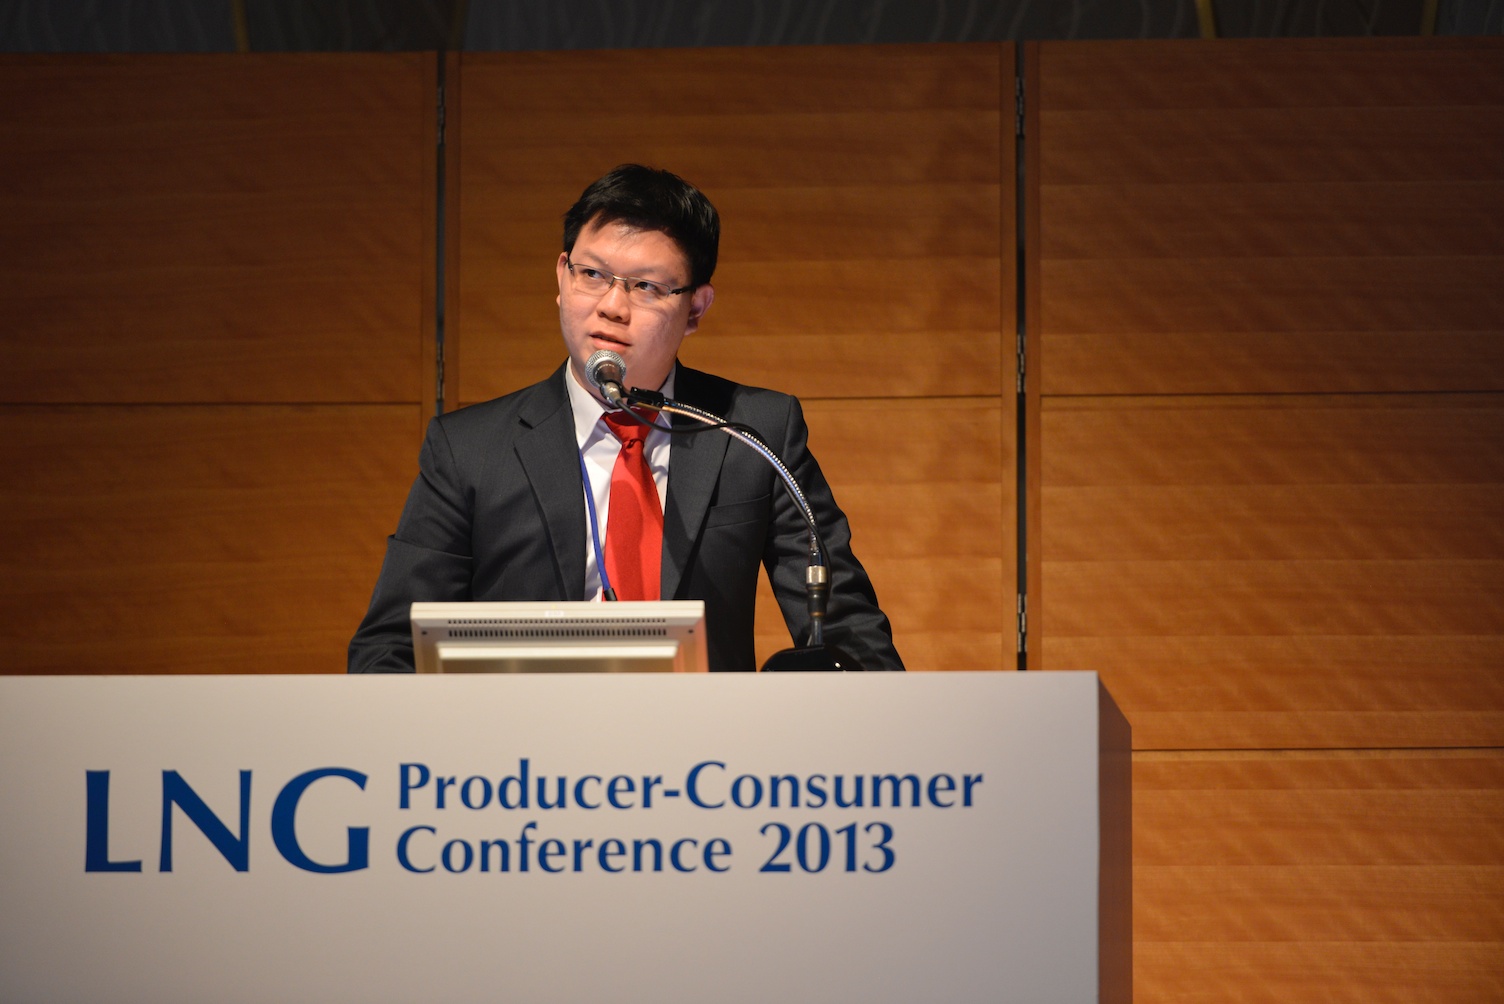 LNG Producer Consumer Conference 2013  (6)  09 10 2013